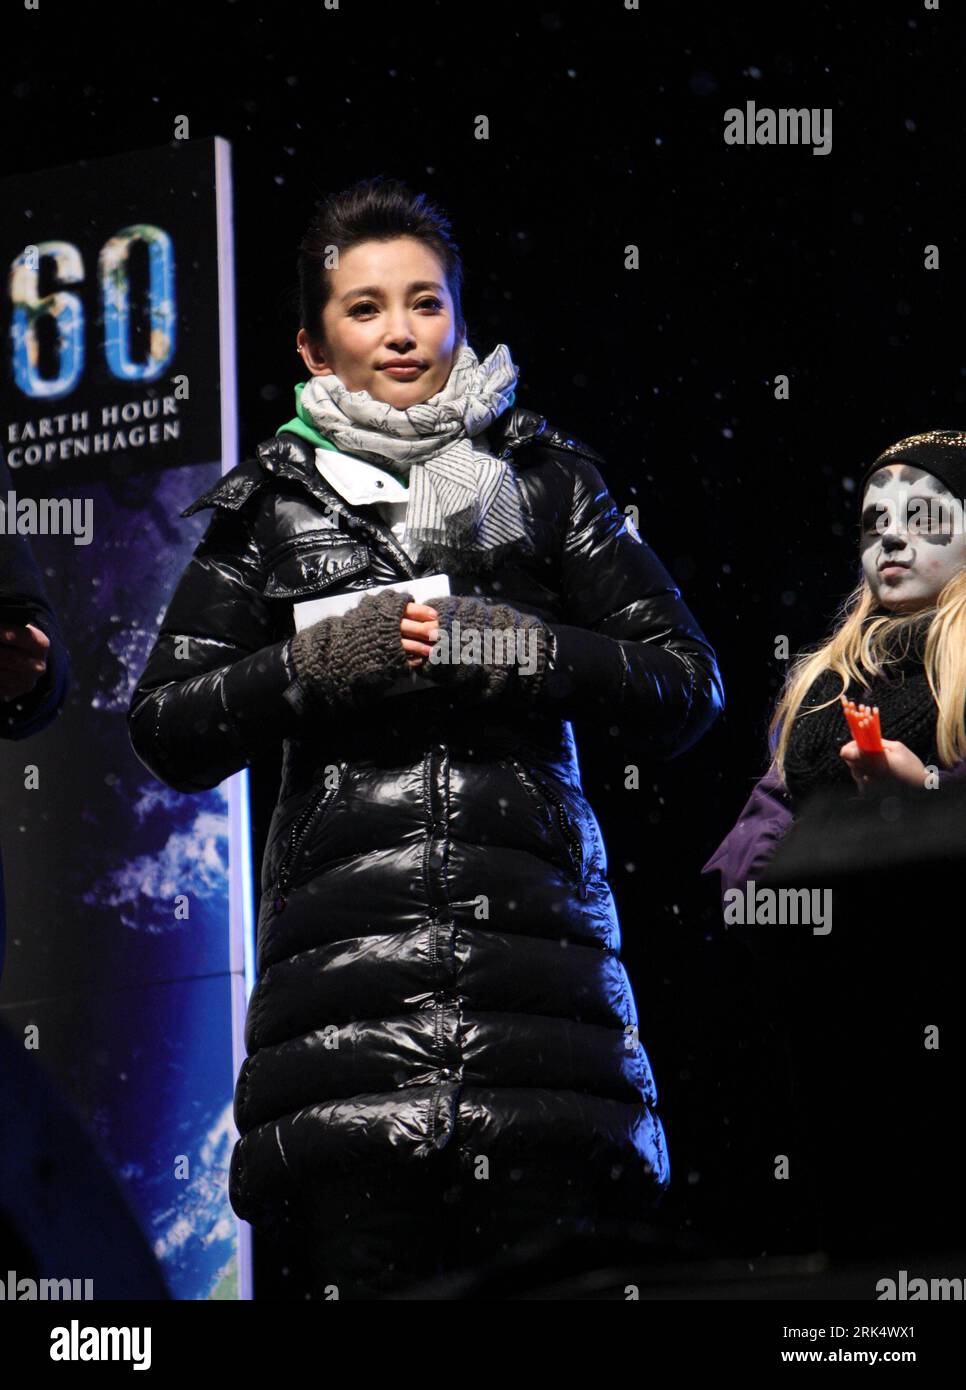 Bildnummer: 53675336  Datum: 16.12.2009  Copyright: imago/Xinhua (091217) -- COPENHAGEN, Dec. 17, 2009 (Xinhua) -- Chinese artist Li Bingbing attends the Earth Hour Copenhagen in the capital city of Denmark, on Dec. 16, 2009. The Earth Hour Copenhagen event calls for households and businesses in the city to turn off their non-essential lights and other electrical appliances for one hour, aiming to raise awareness of the need to take action on climate change. (Xinhua/Xie Xiudong) (zl) (4)DENMARK-COPENHAGEN-EARTH HOUR PUBLICATIONxNOTxINxCHN Kopenhagen Kimaschutz Initiative eine 1 Stunde People F Stock Photo